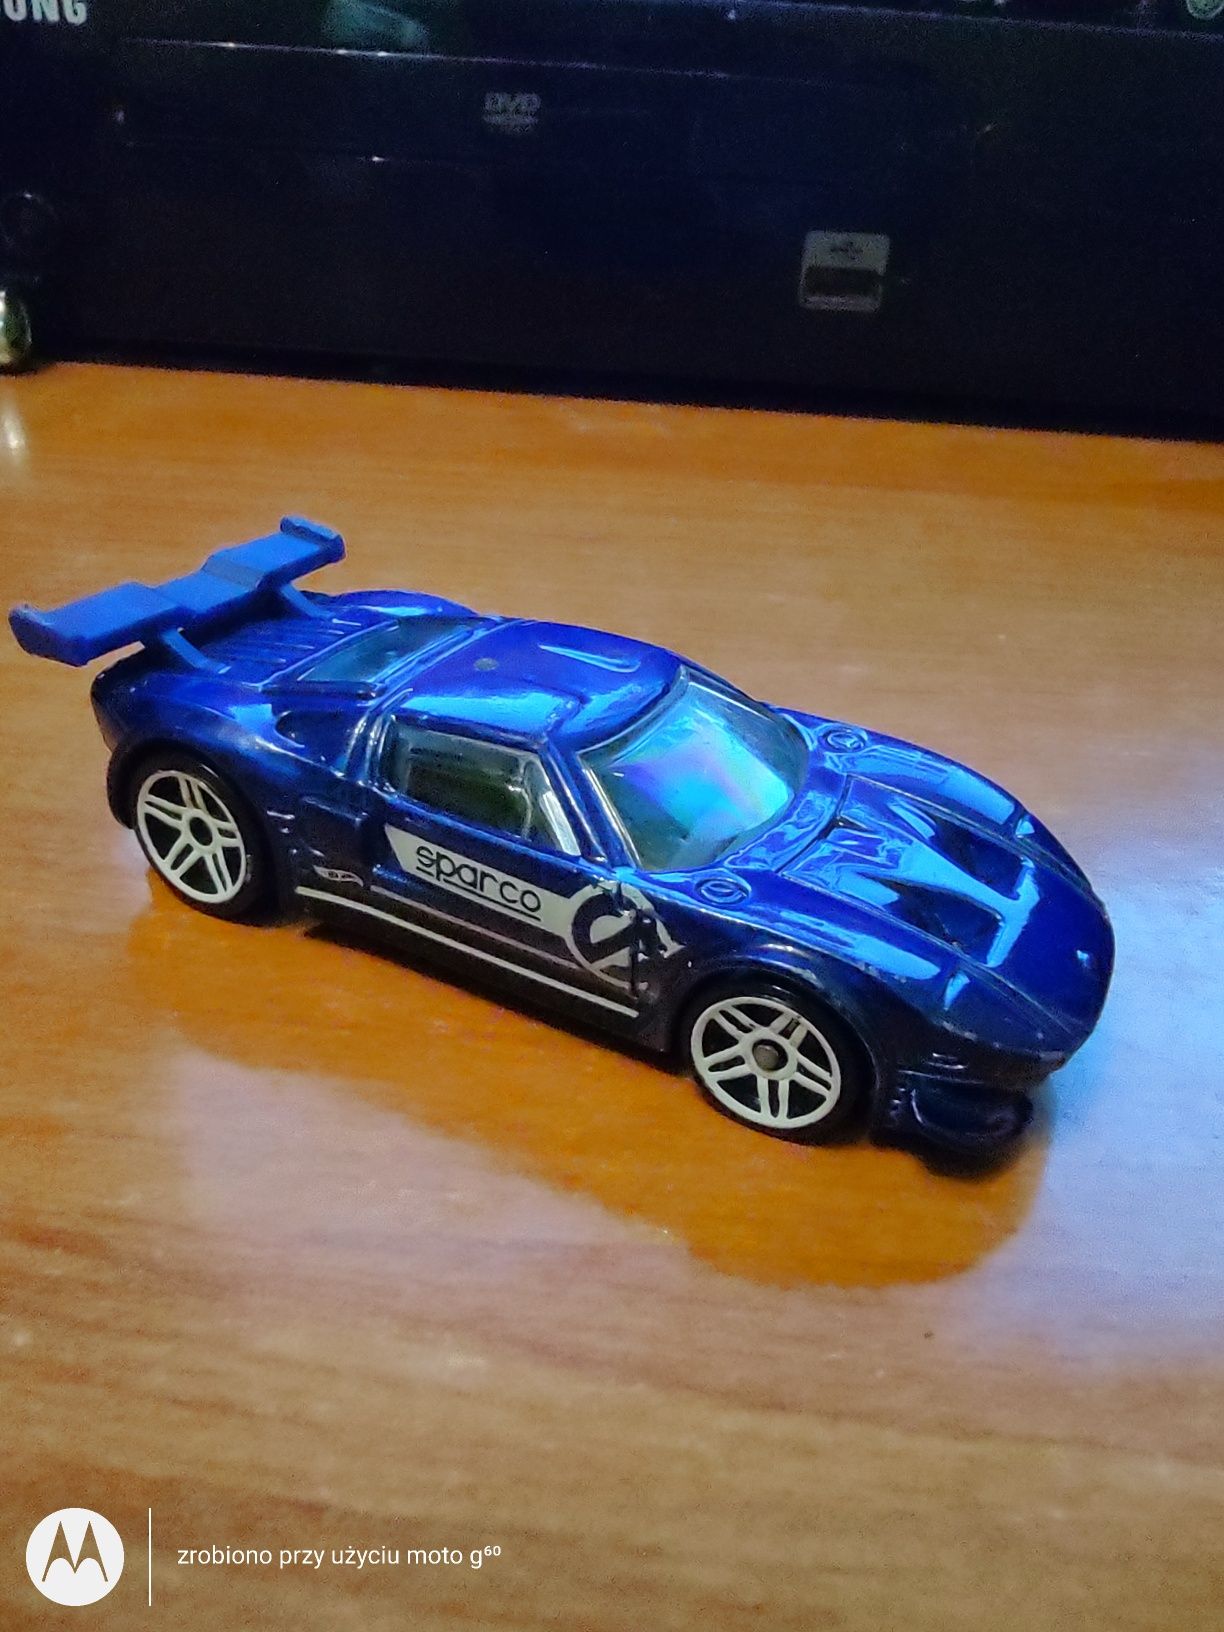 Hot wheels Ford GT Sparco